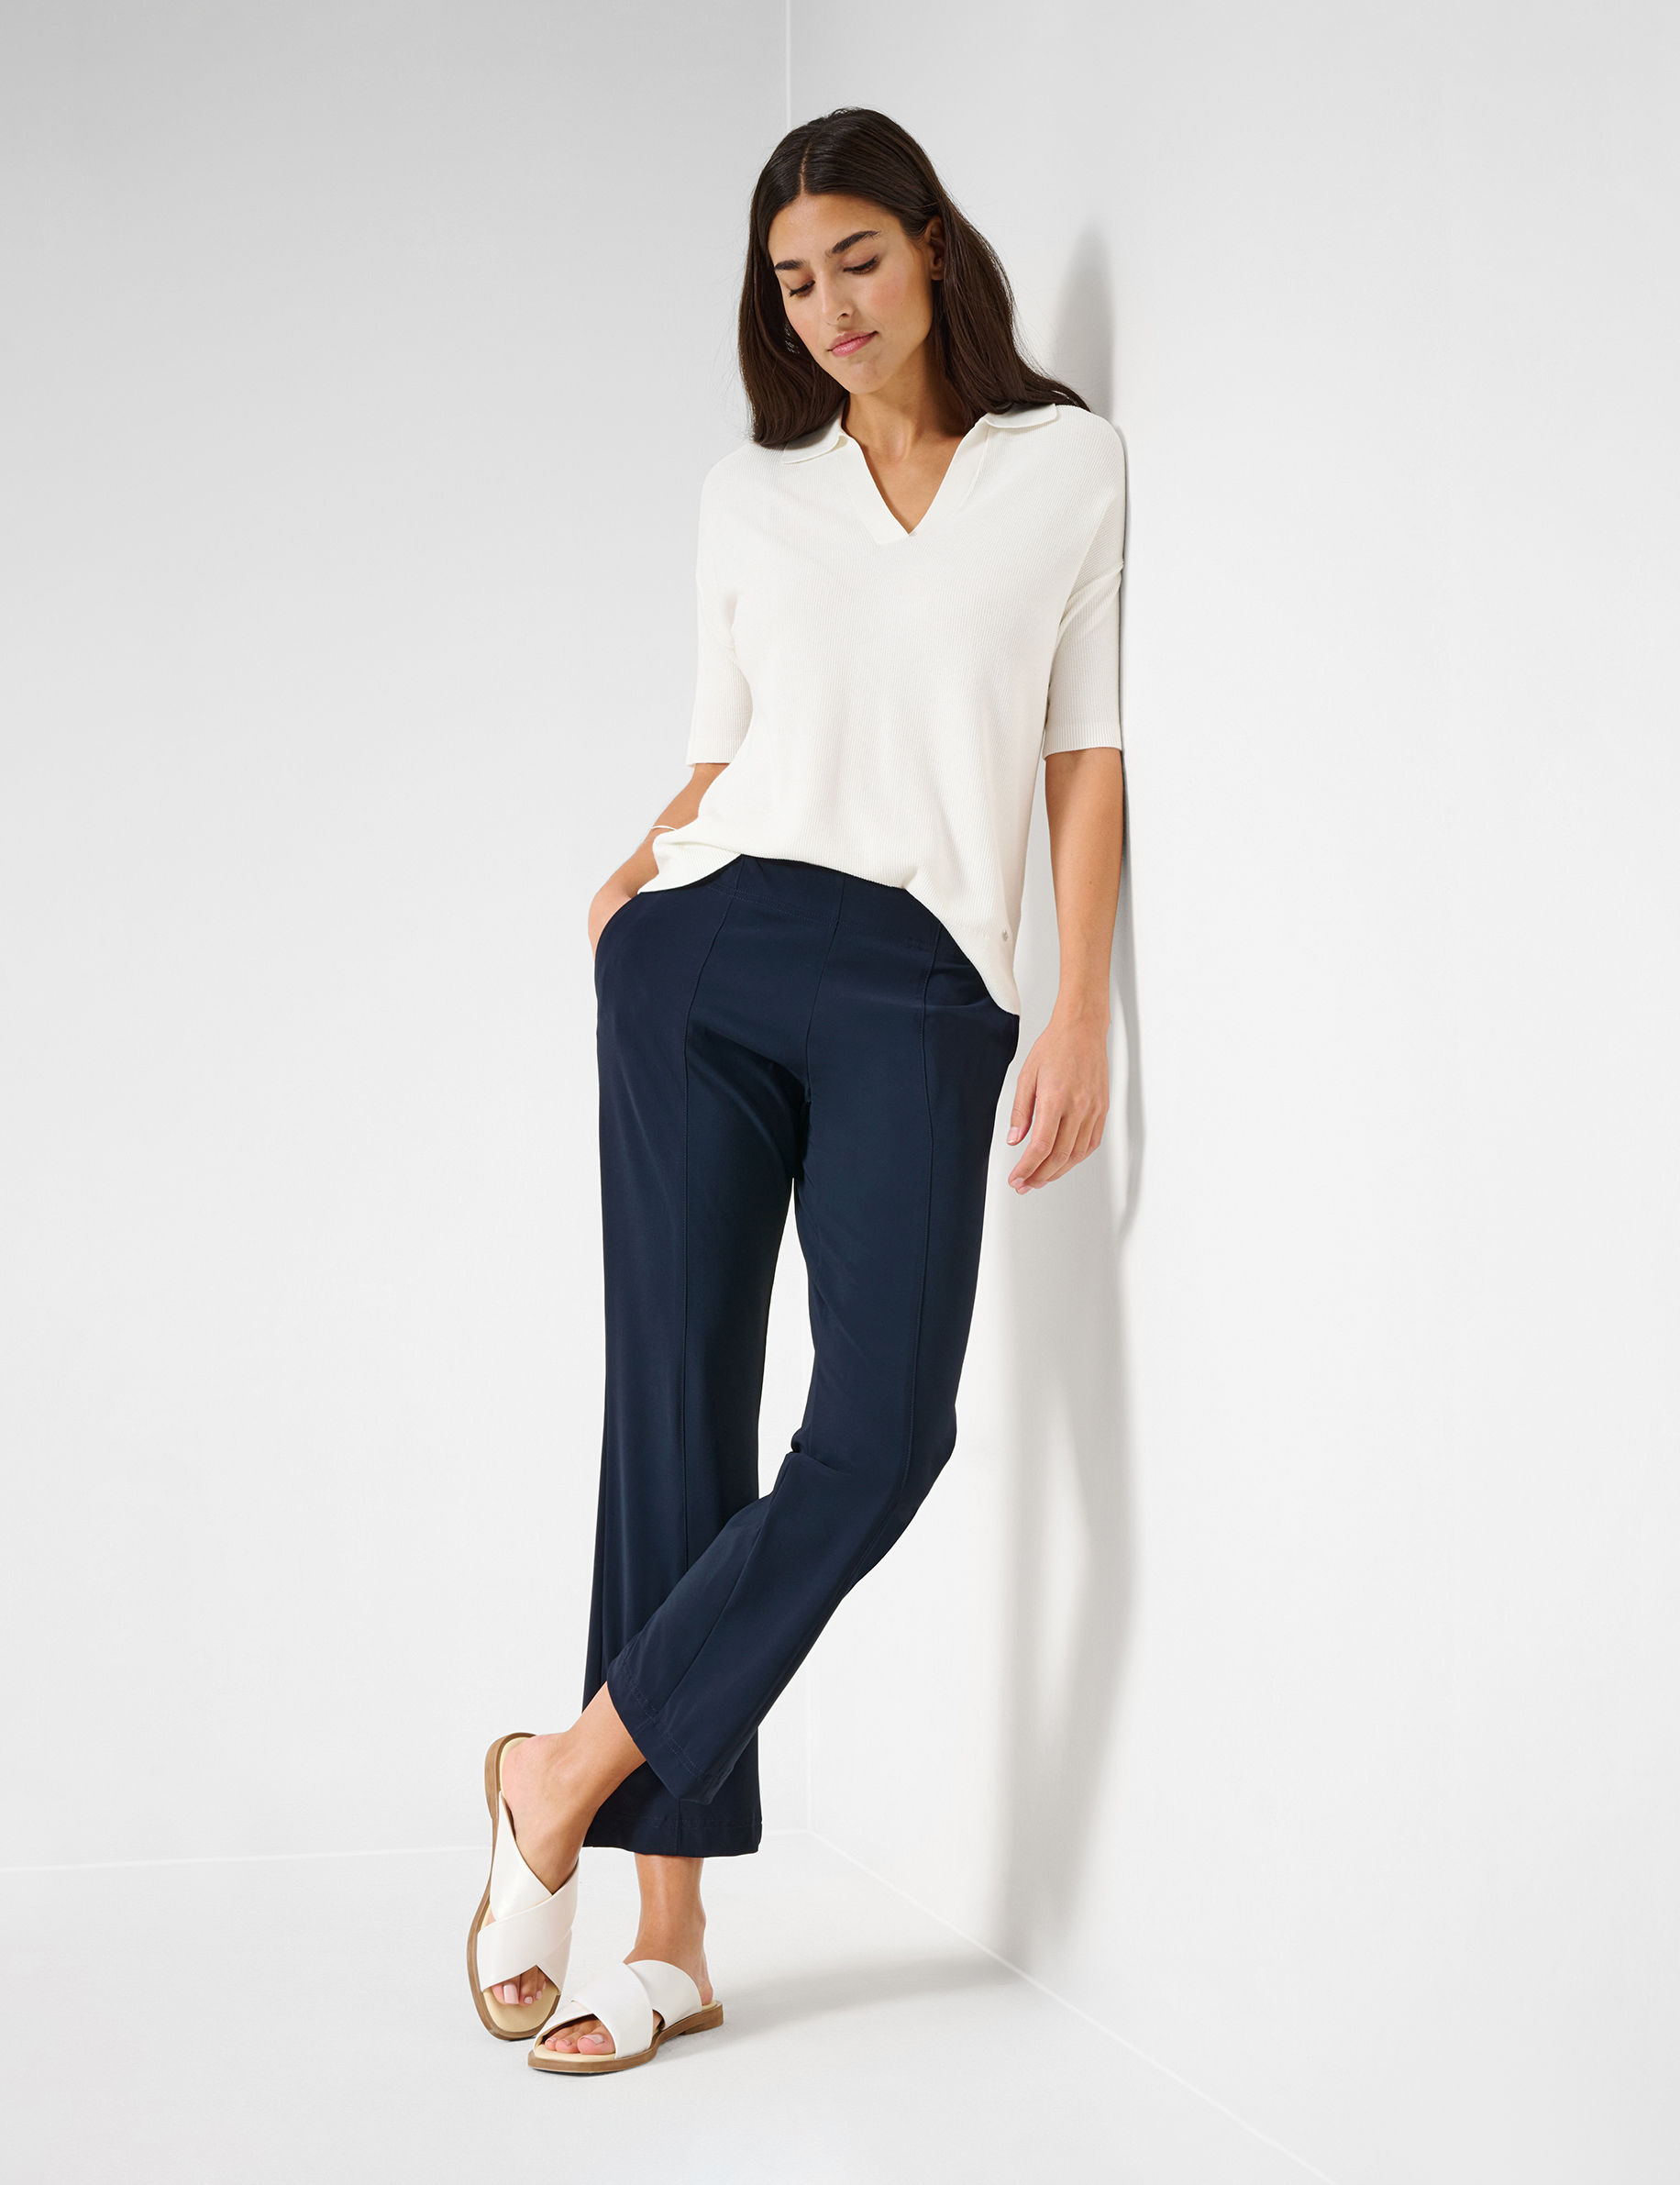 Women Style MALIA S NAVY Slim Fit Model Outfit